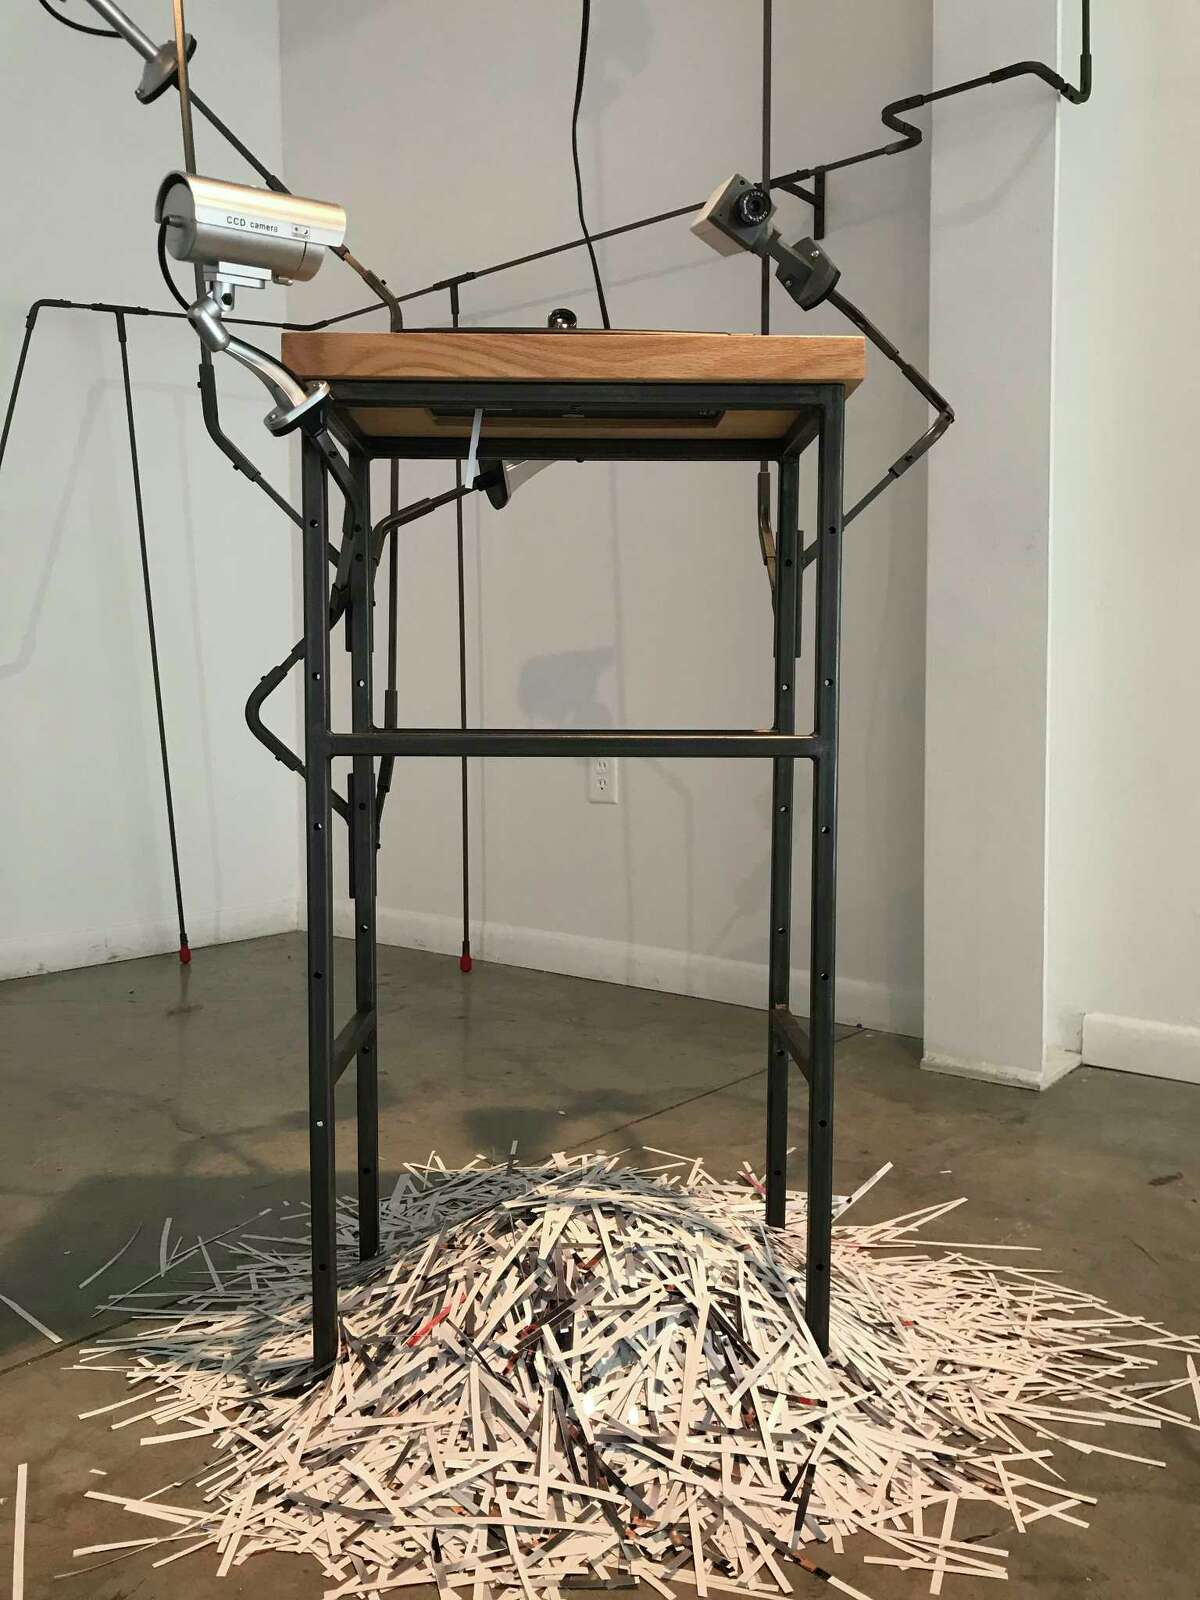 A view of Edward Kelley's interactive installation "Speak of the Devil," which contains working surveillance cameras, at Art League Houston through July 22.